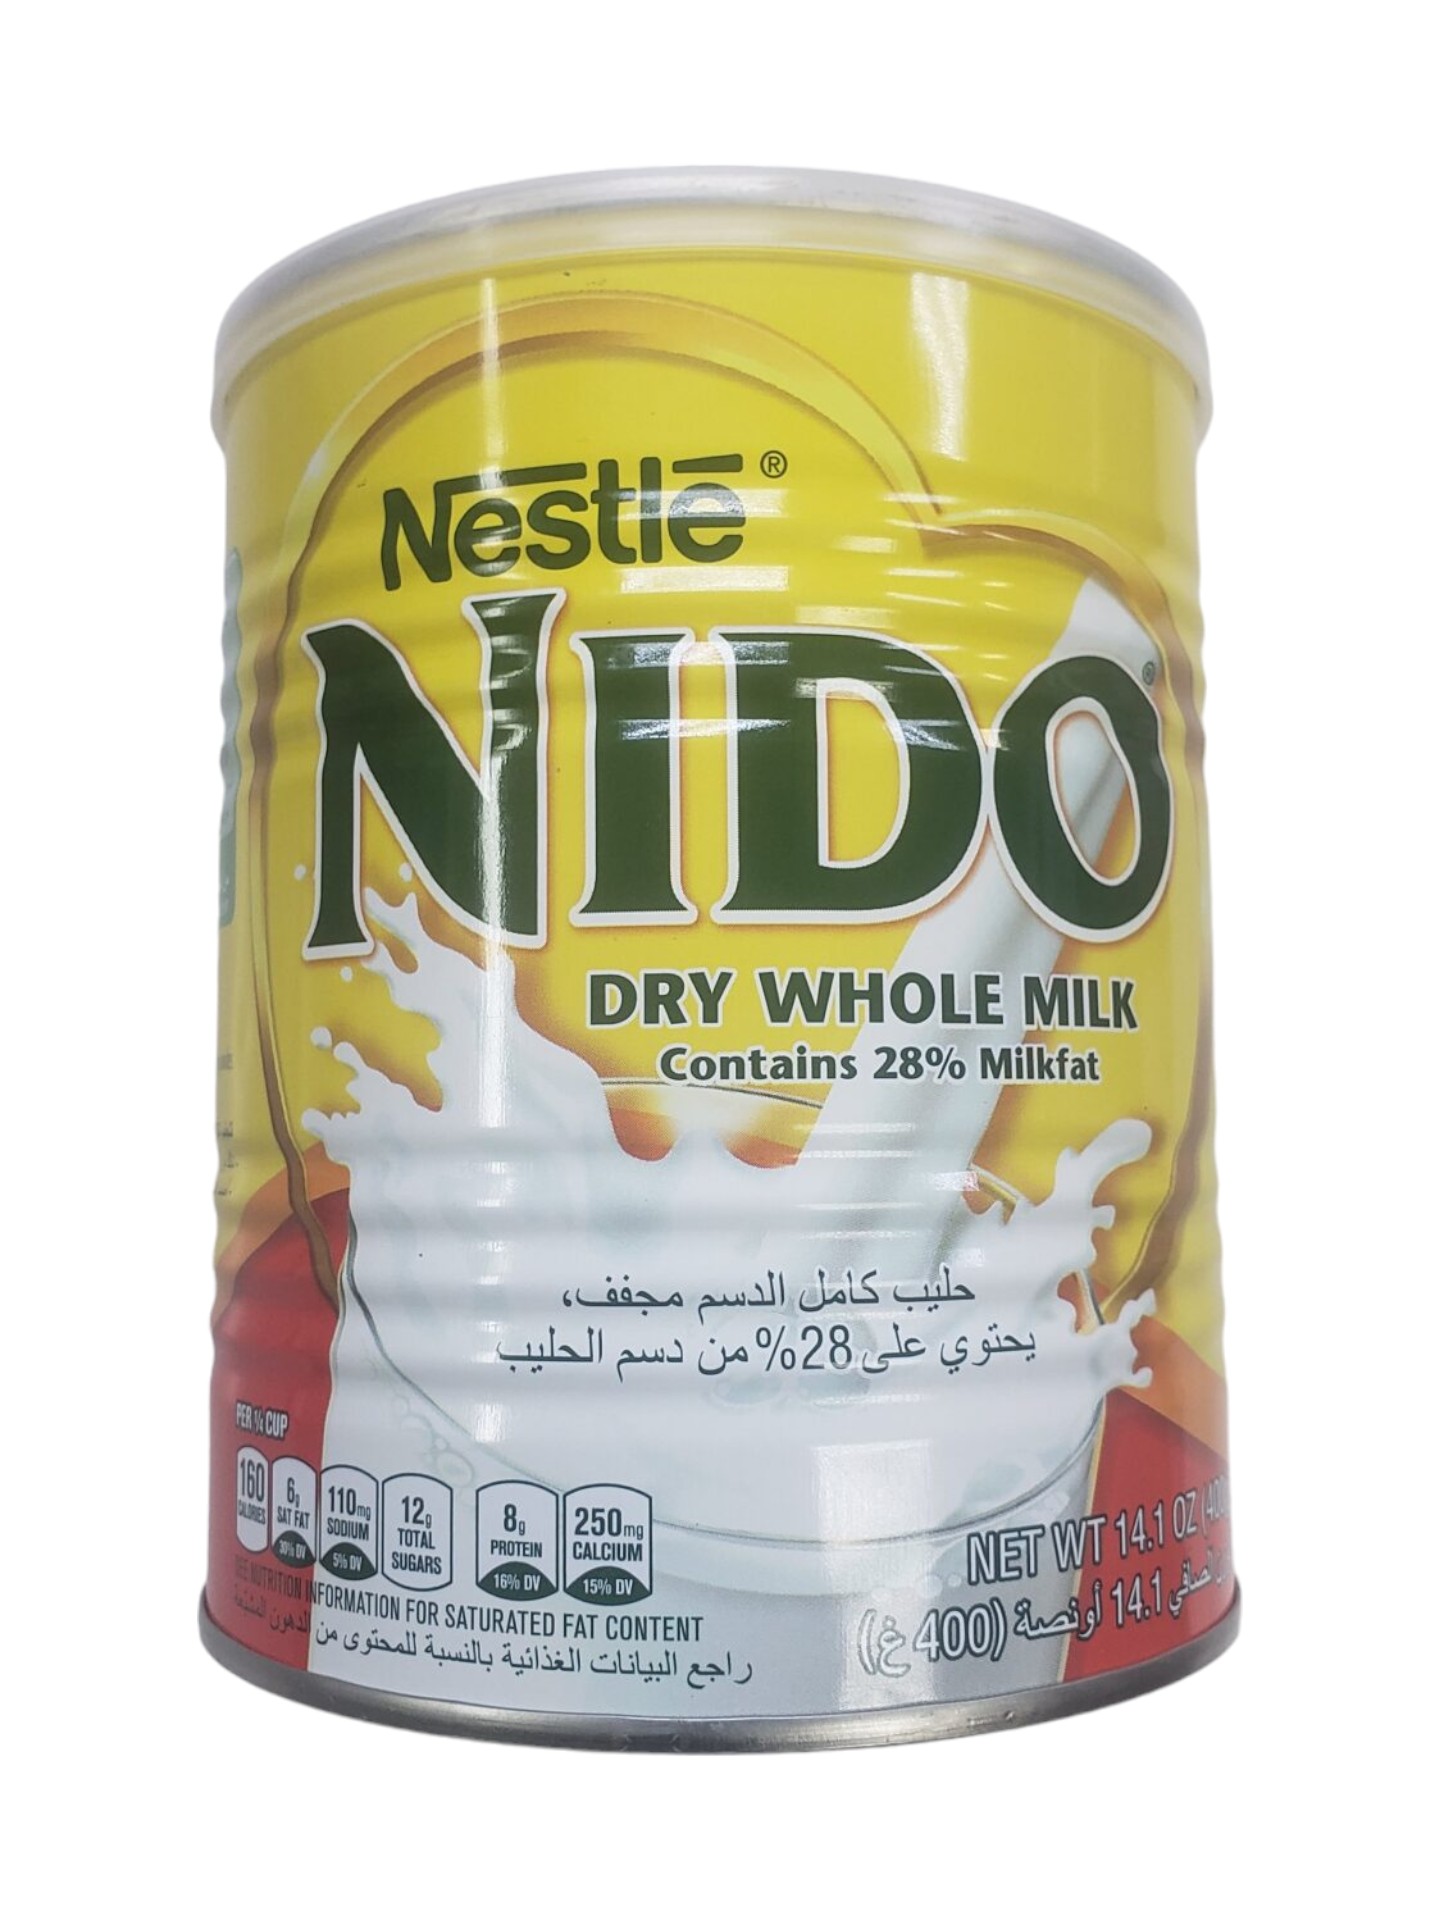 Nestle NIDO dry whole drink with 28% milkfat - Haitian store